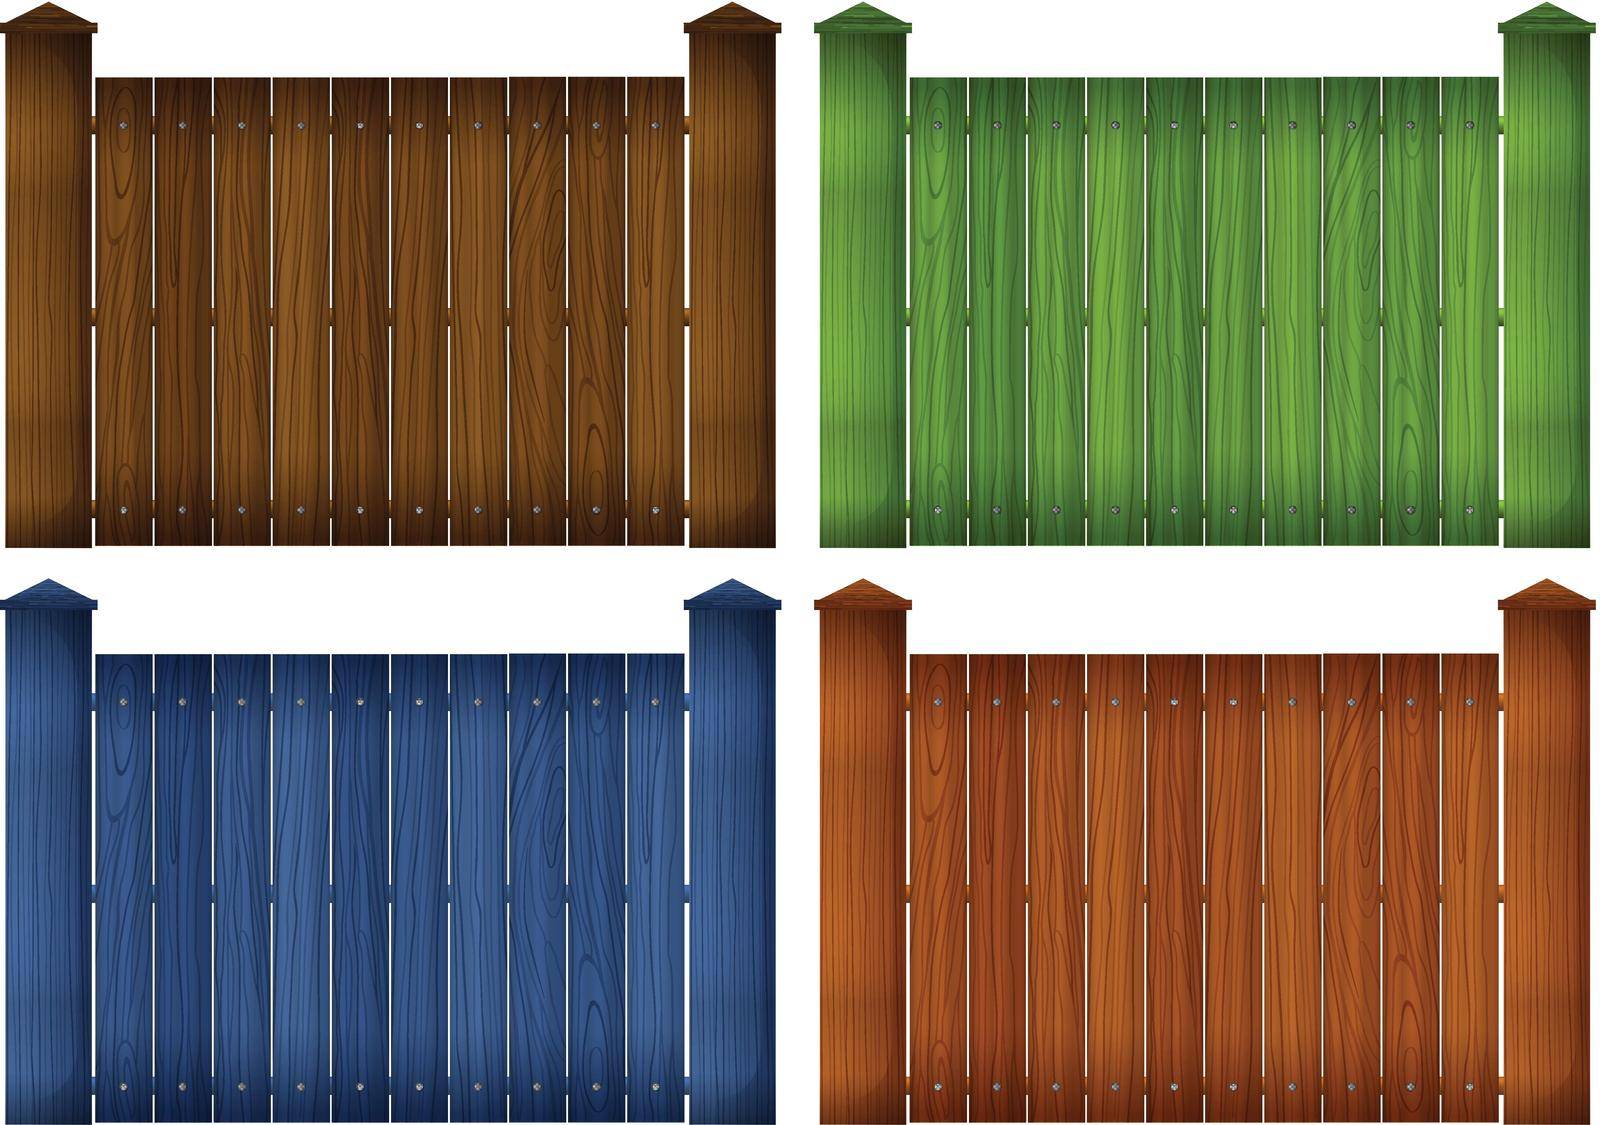 Four colorful wooden fences by iimages